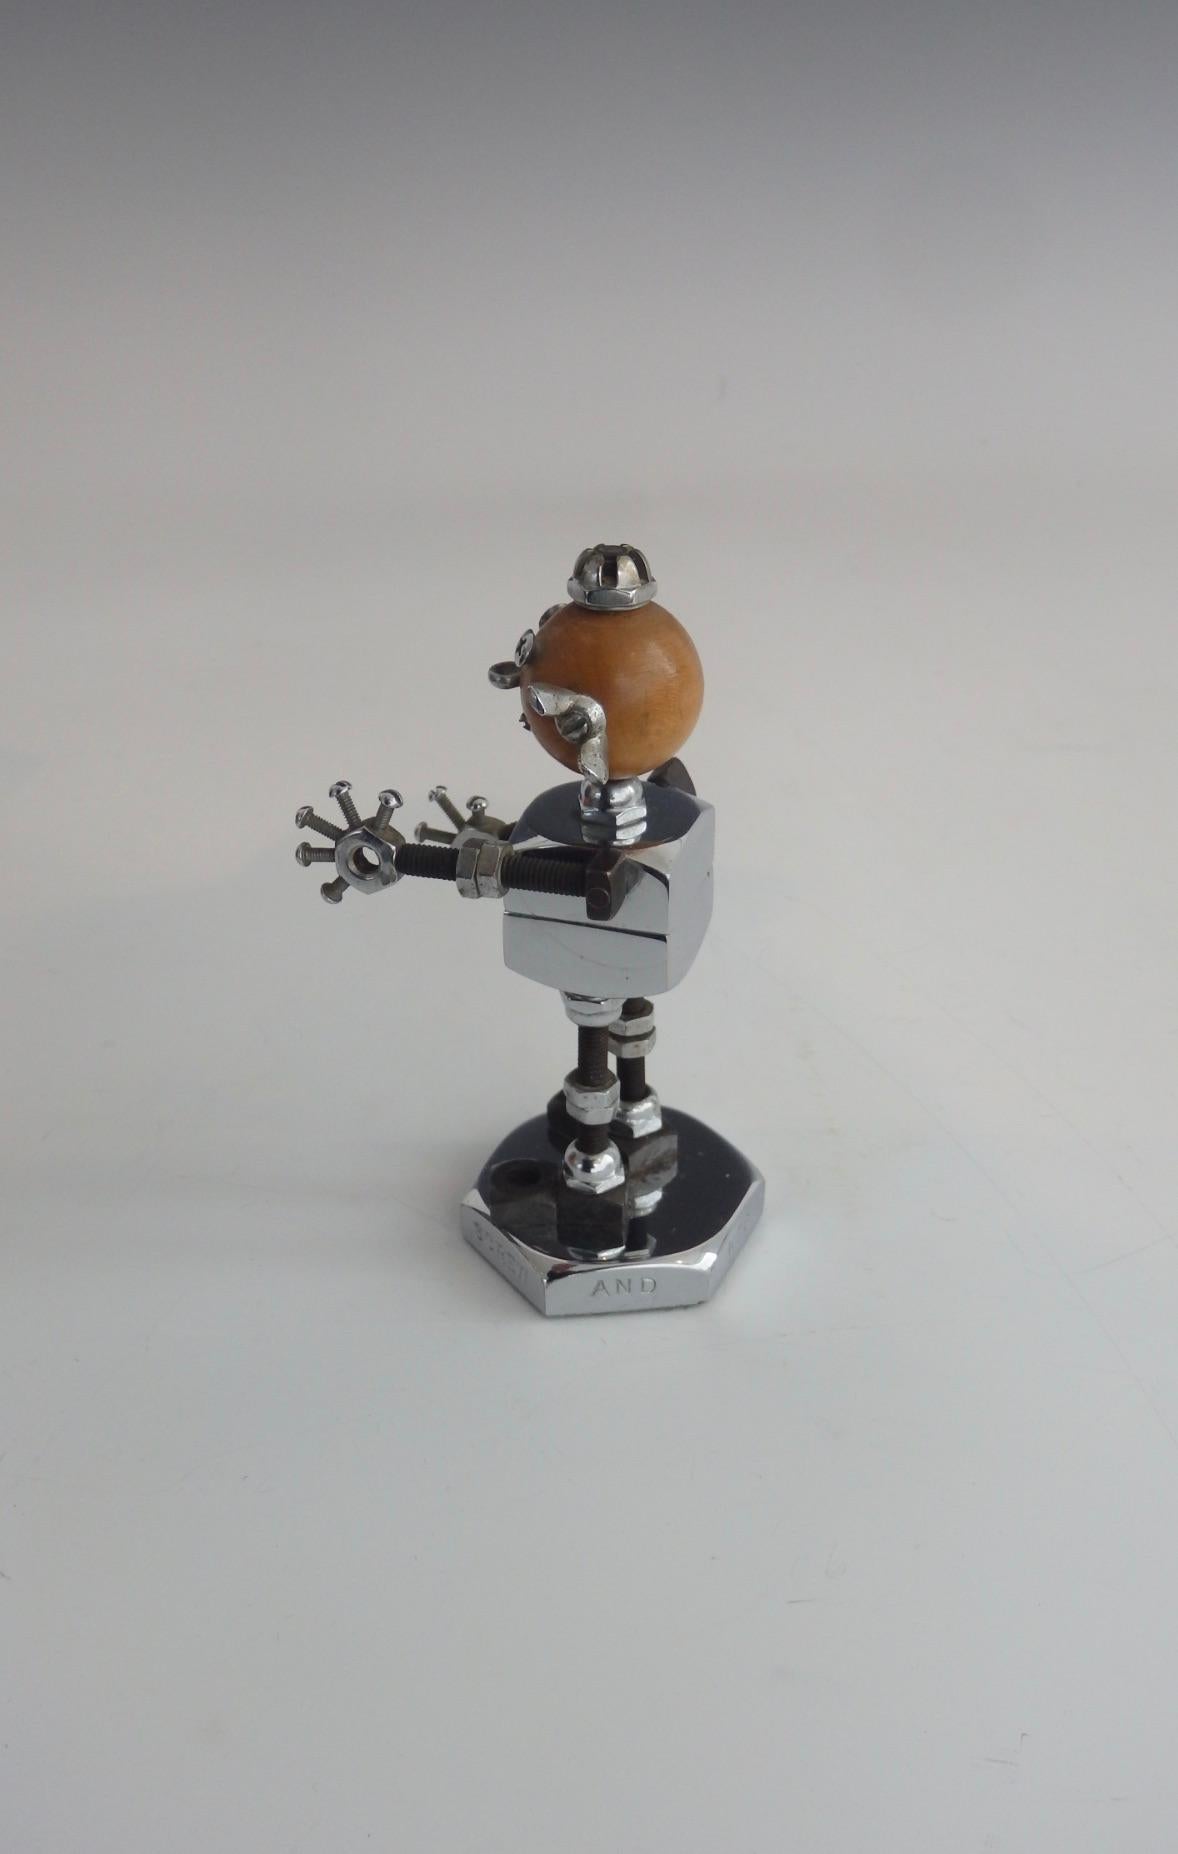 National Hardware Desk Top Advertising Logo Robot Sculpture In Good Condition For Sale In Ferndale, MI